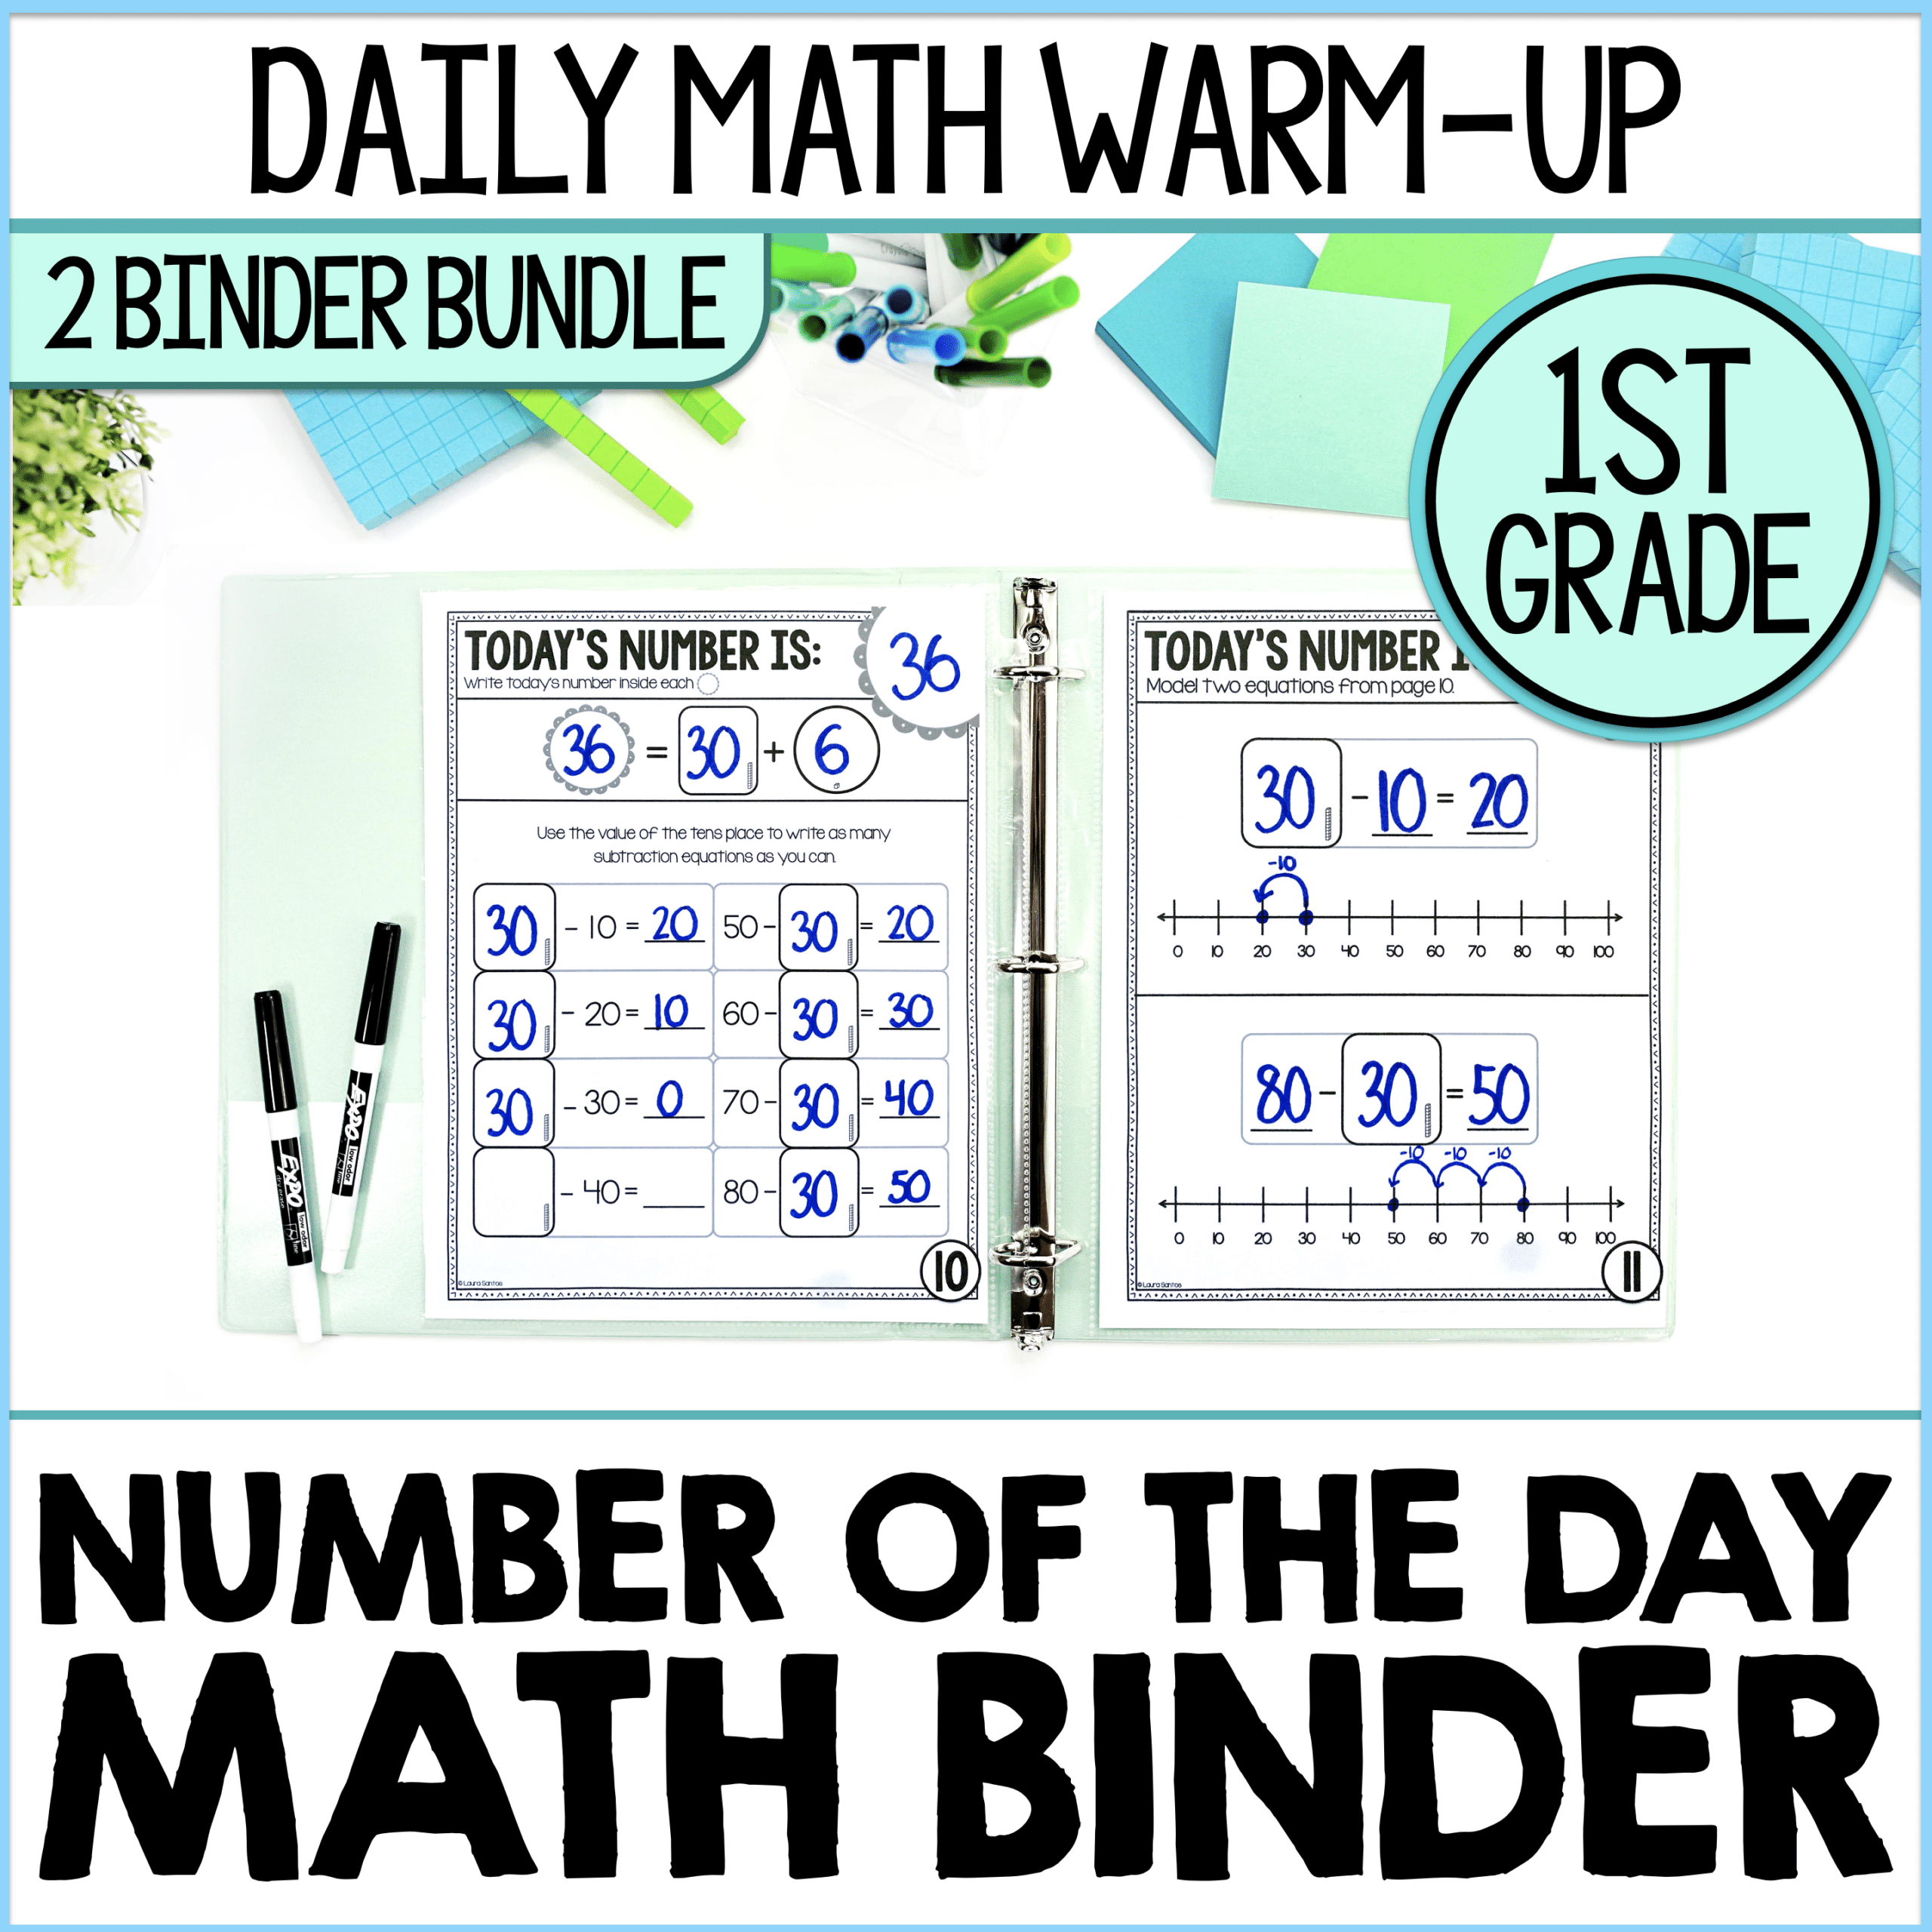 1st Grade Number of the Day Binder Bundle Cover from Core Inspiration